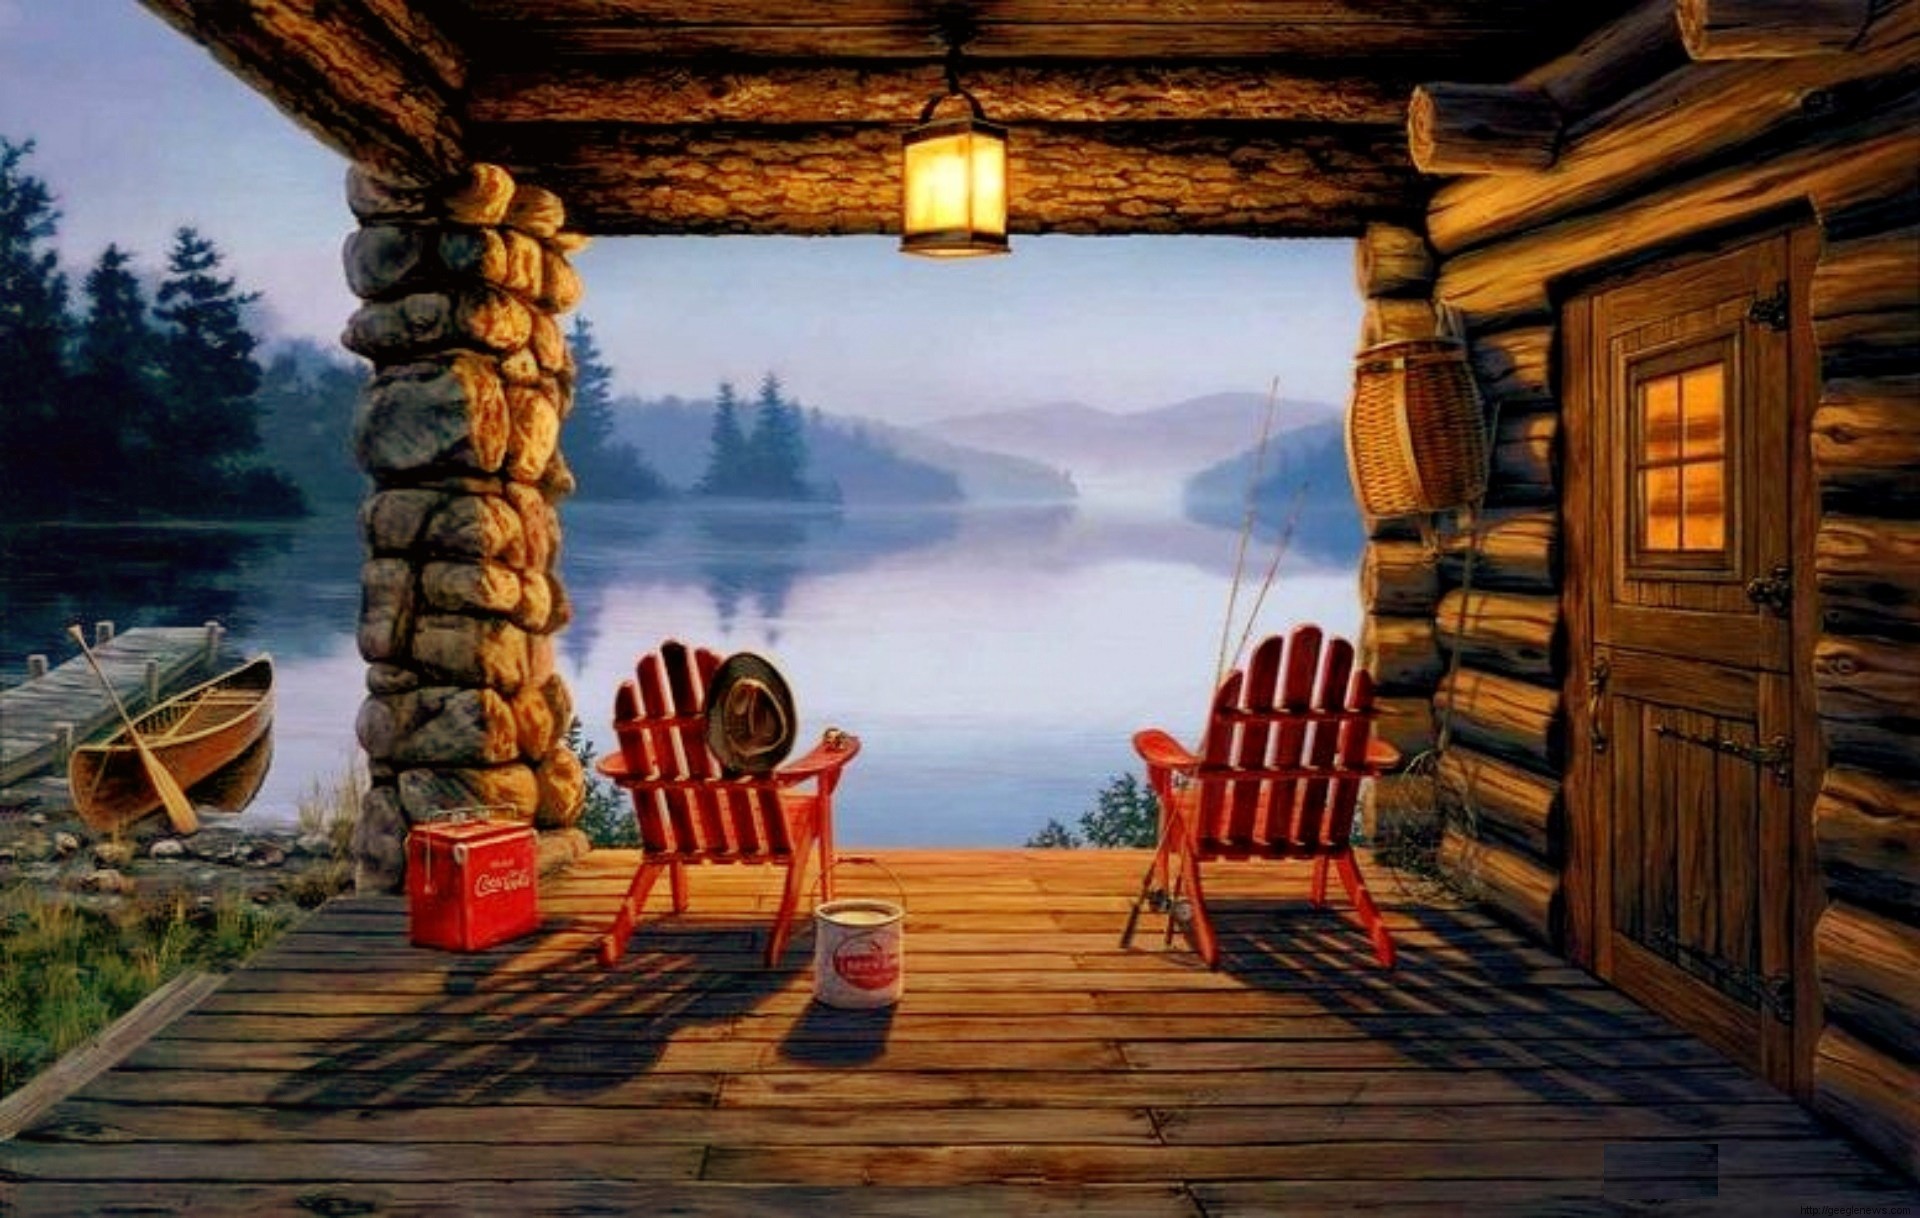 Wooden House HD Wallpapers - Geegle News